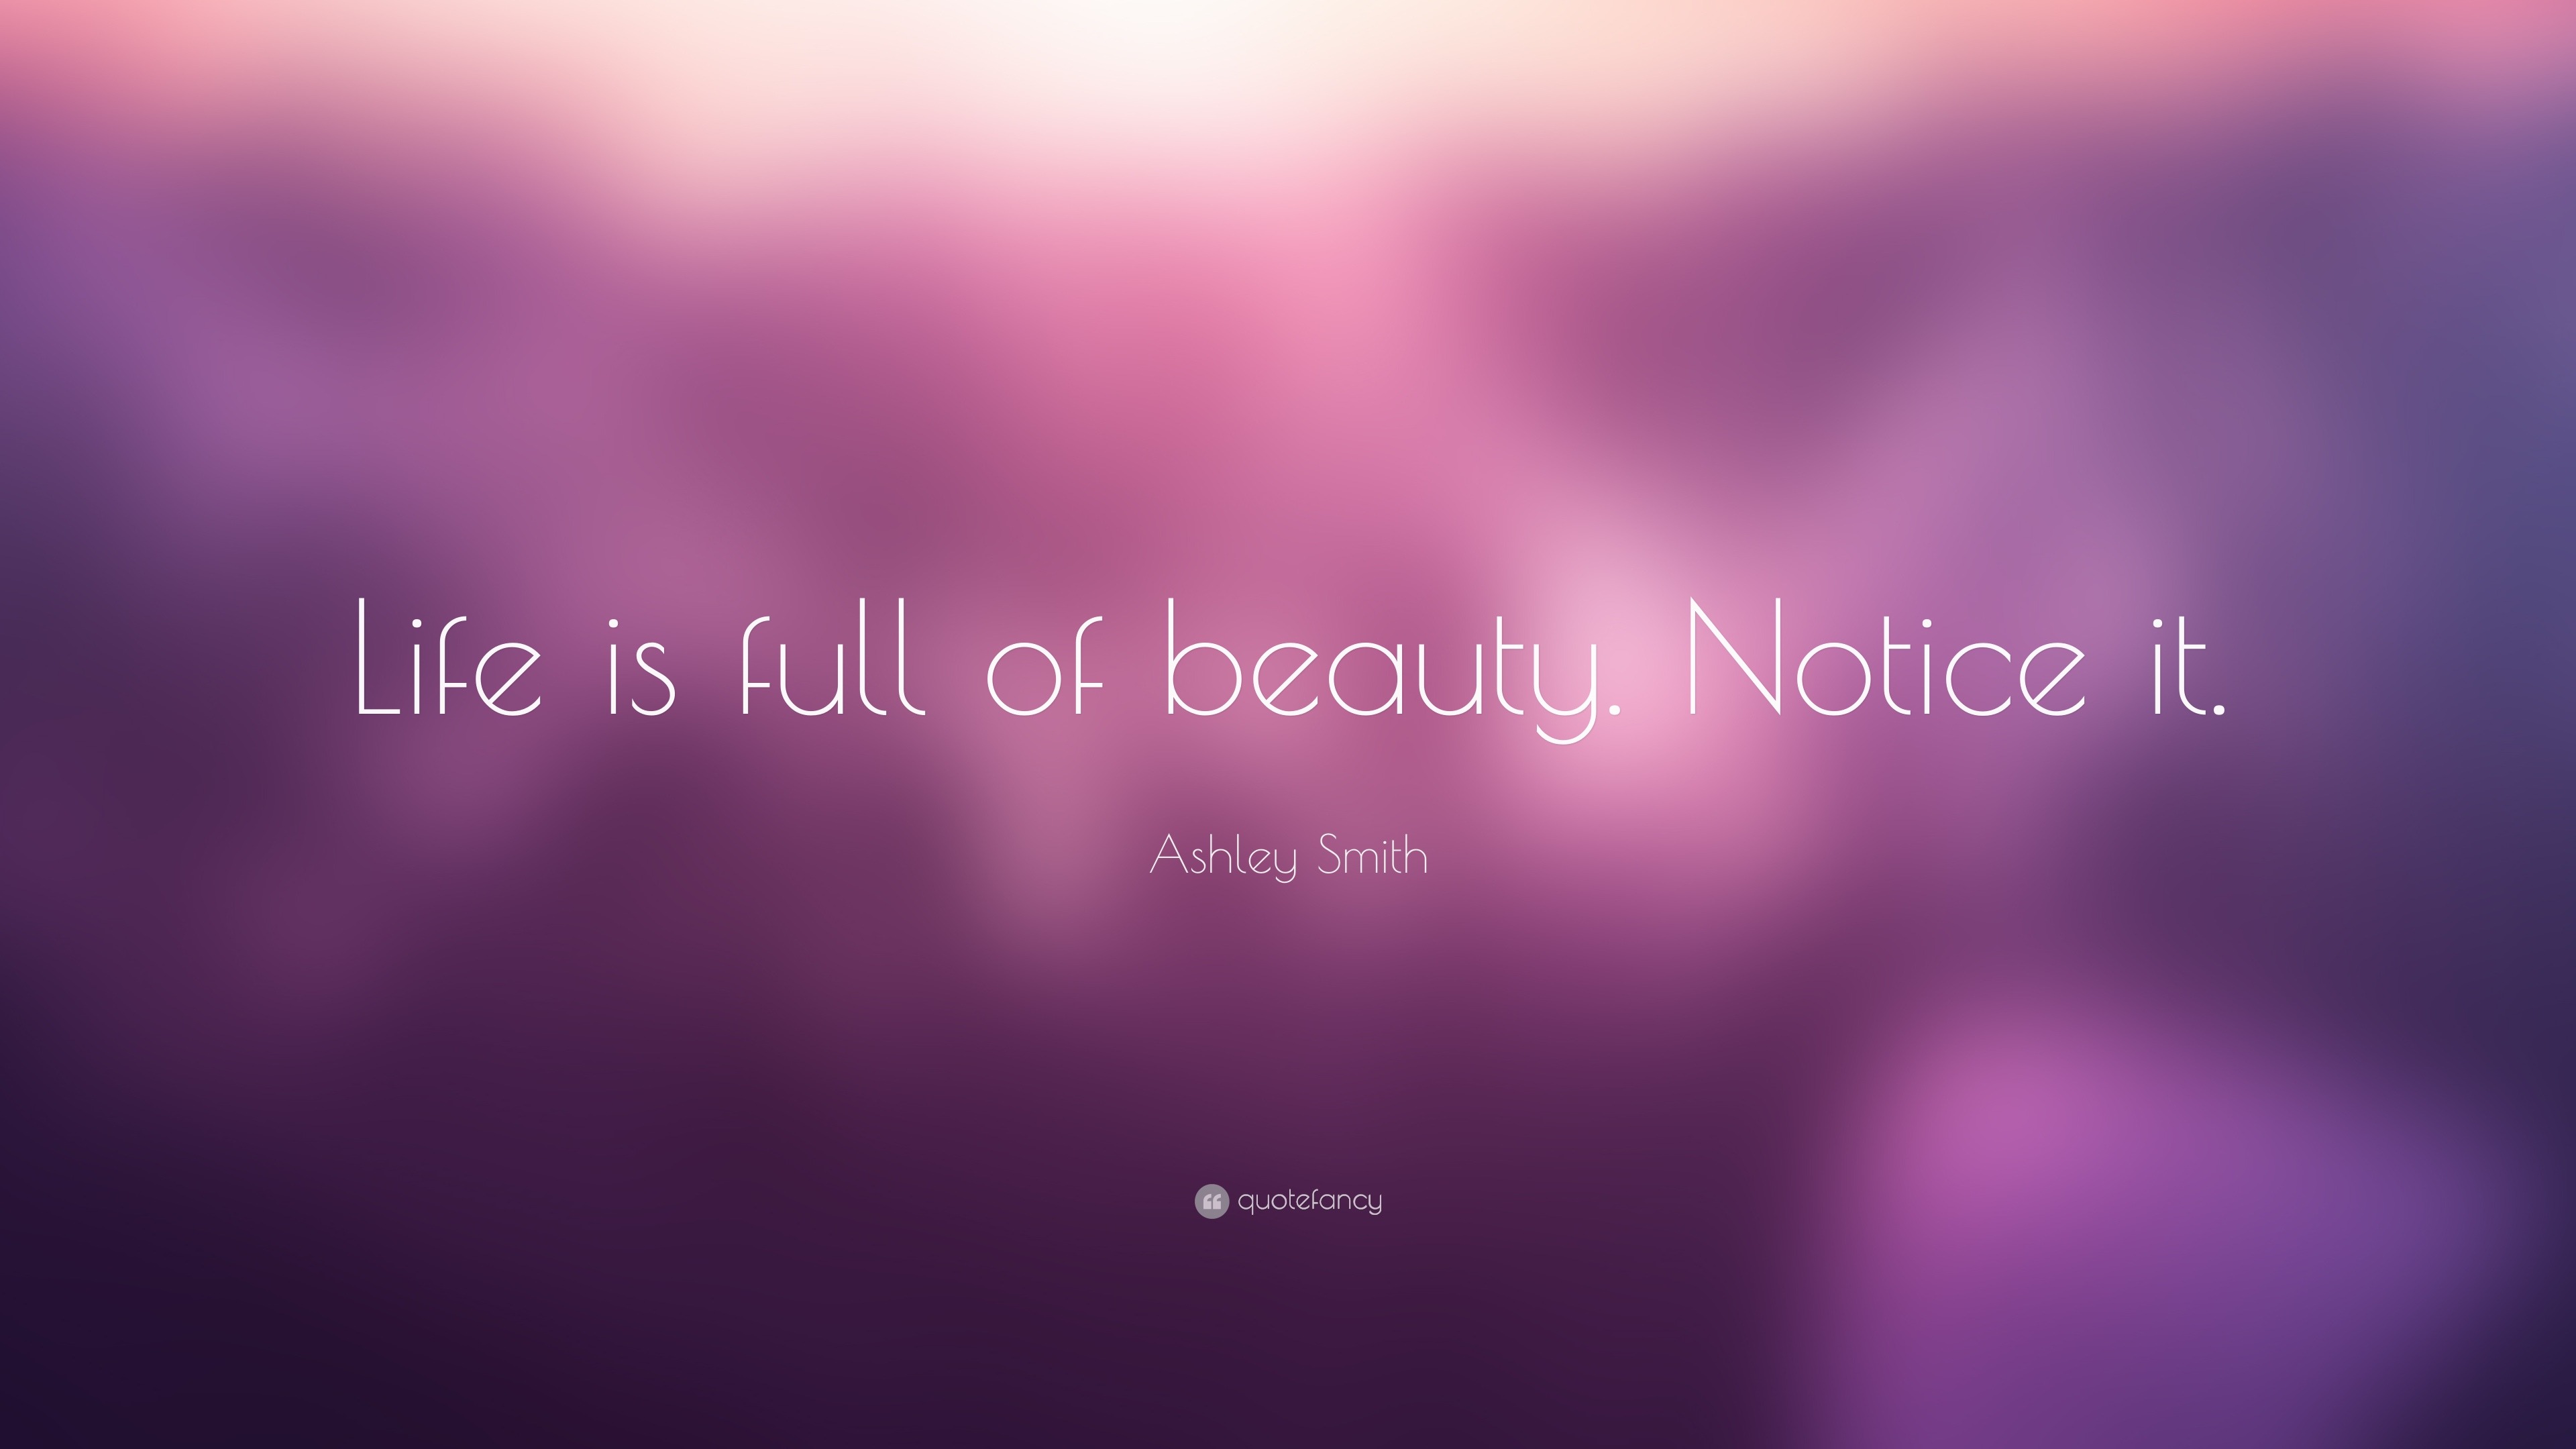 Ashley Smith Quote “Life is full of beauty Notice it ”